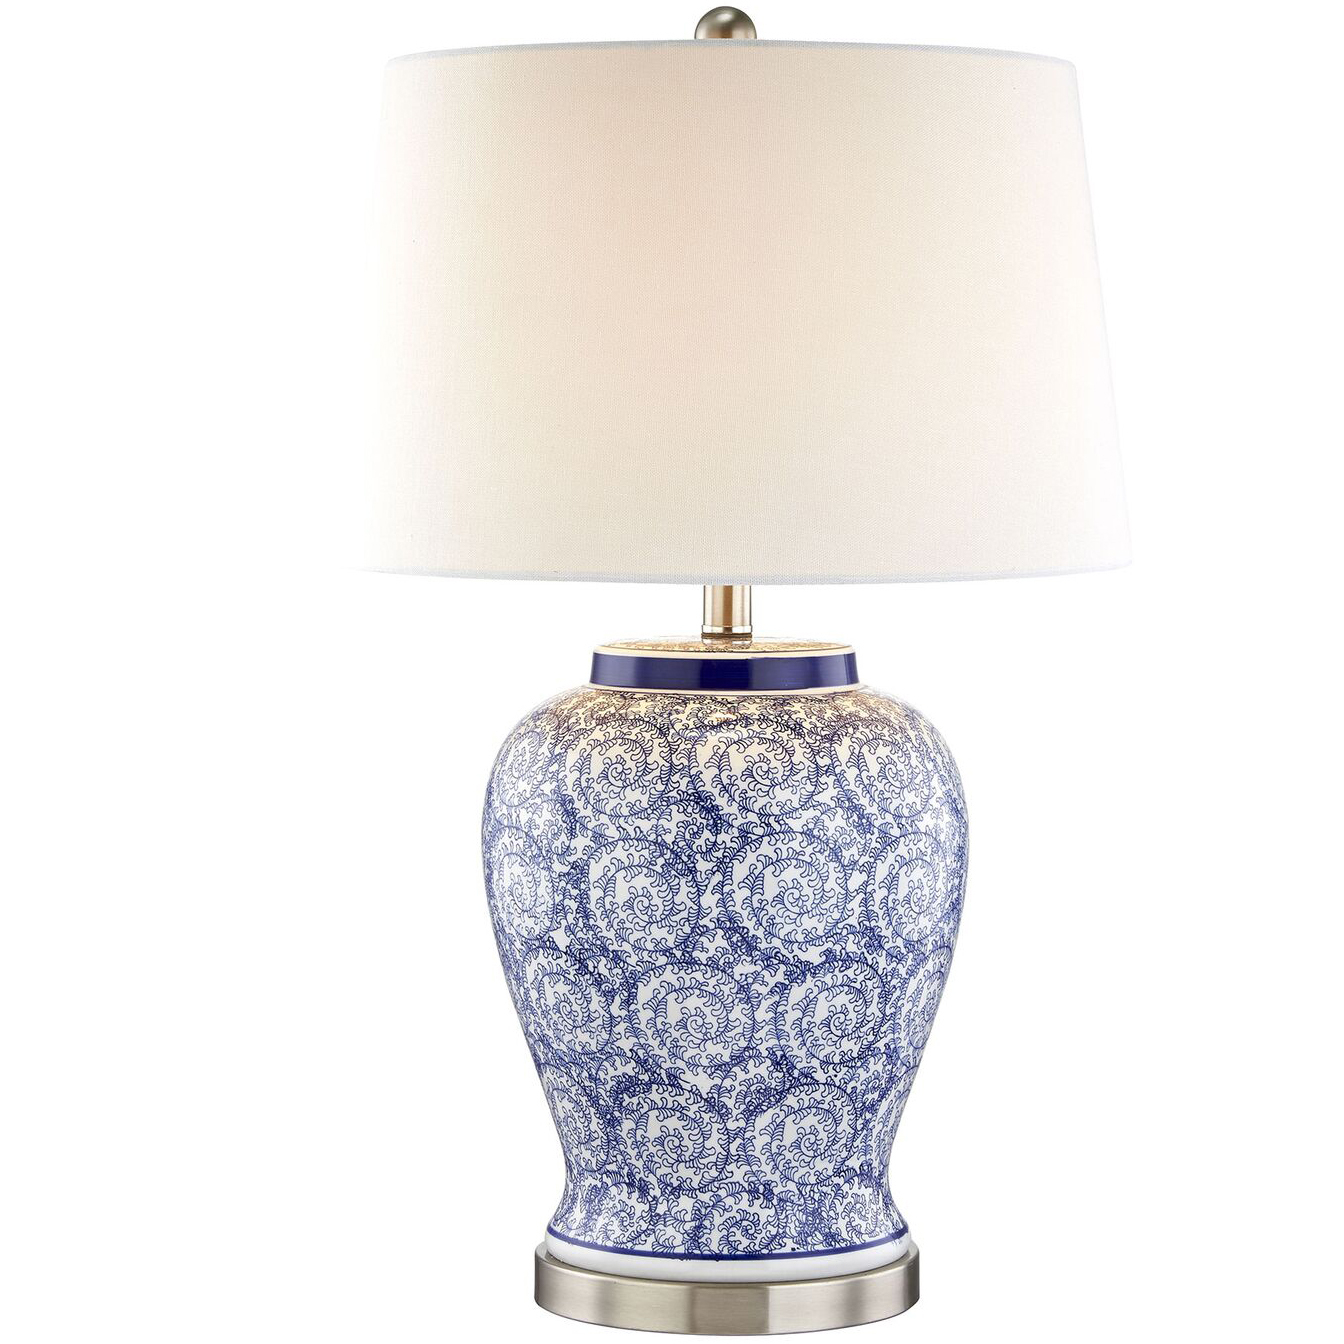 Details About New Tessa Swirl Ceramic Table Lamp Temple Websterlamps with dimensions 1344 X 1344